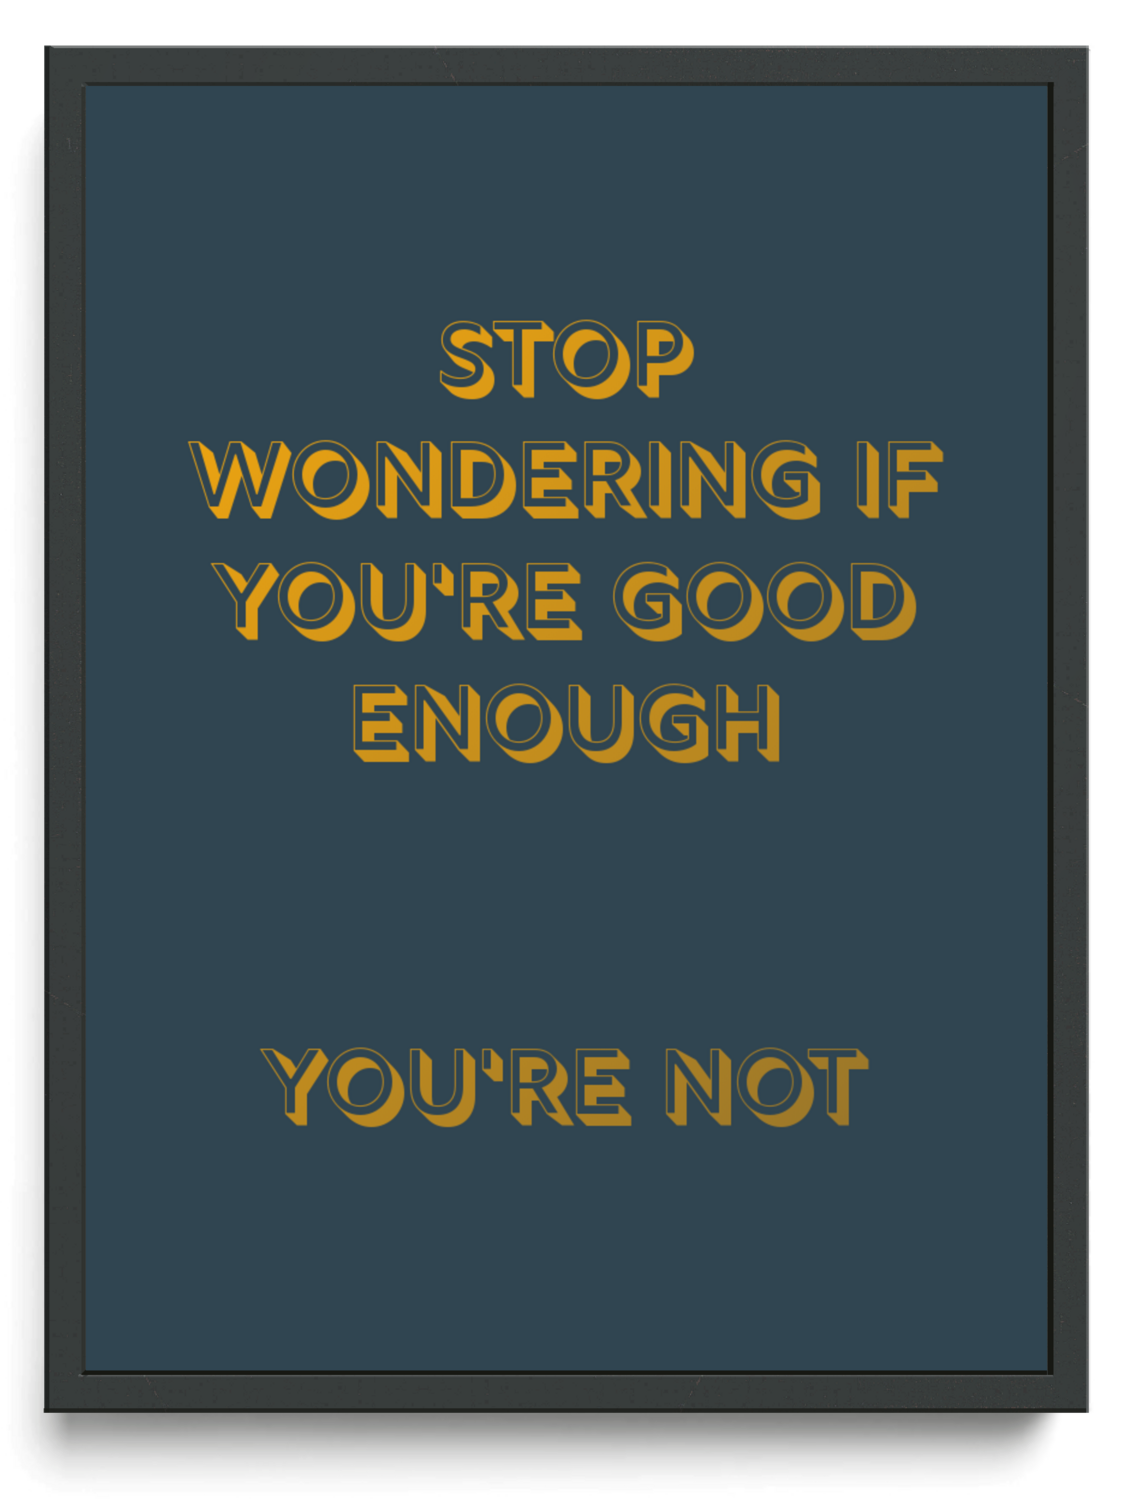 Stop wondering if you're good enough. You're not